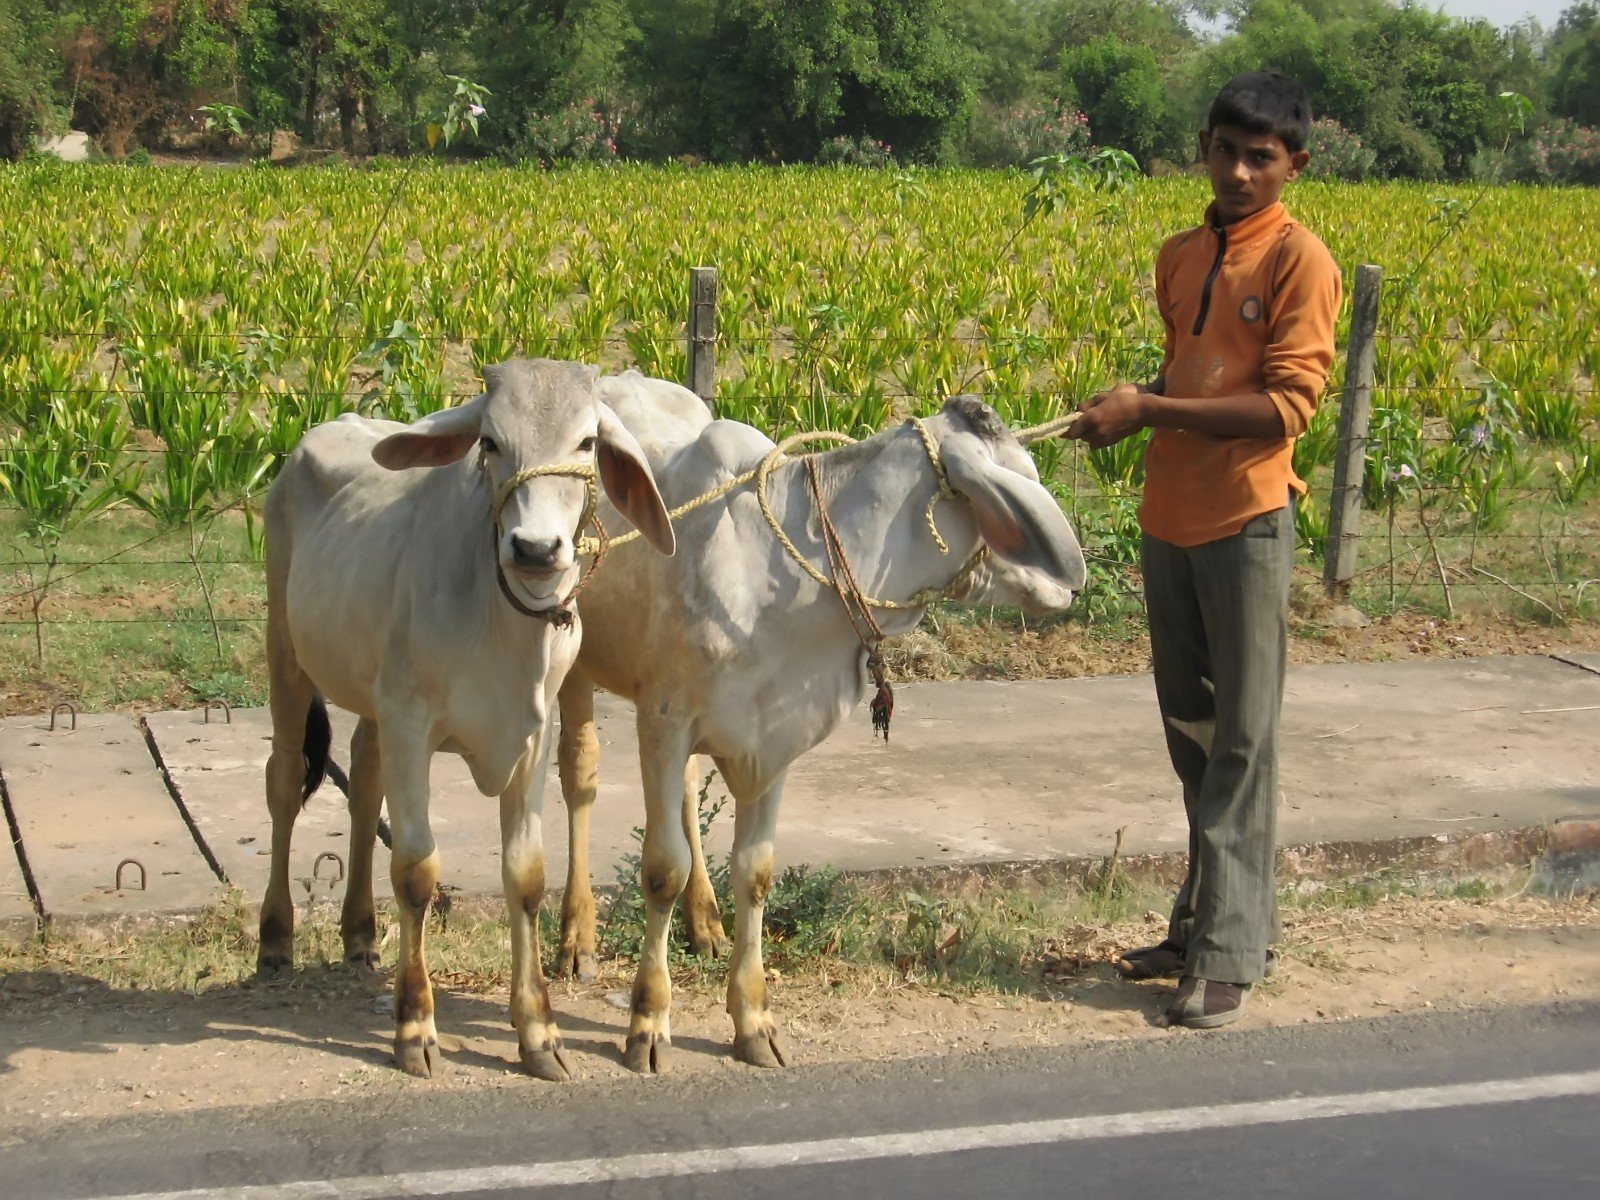 two horses standing beside a man who is working on the street